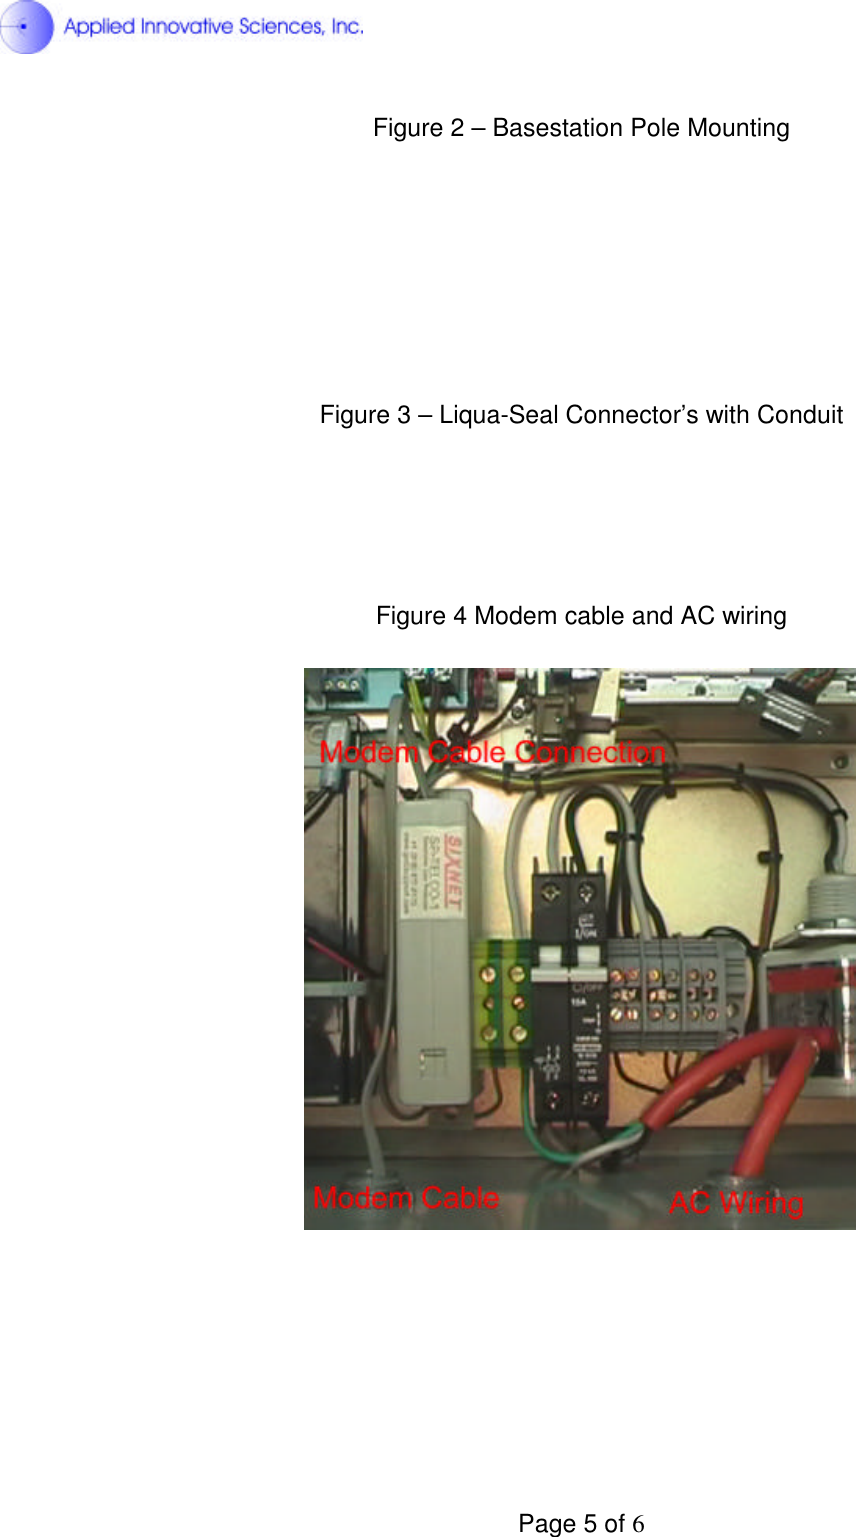  Page 5 of 6 Figure 2 – Basestation Pole Mounting          Figure 3 – Liqua-Seal Connector’s with Conduit       Figure 4 Modem cable and AC wiring           